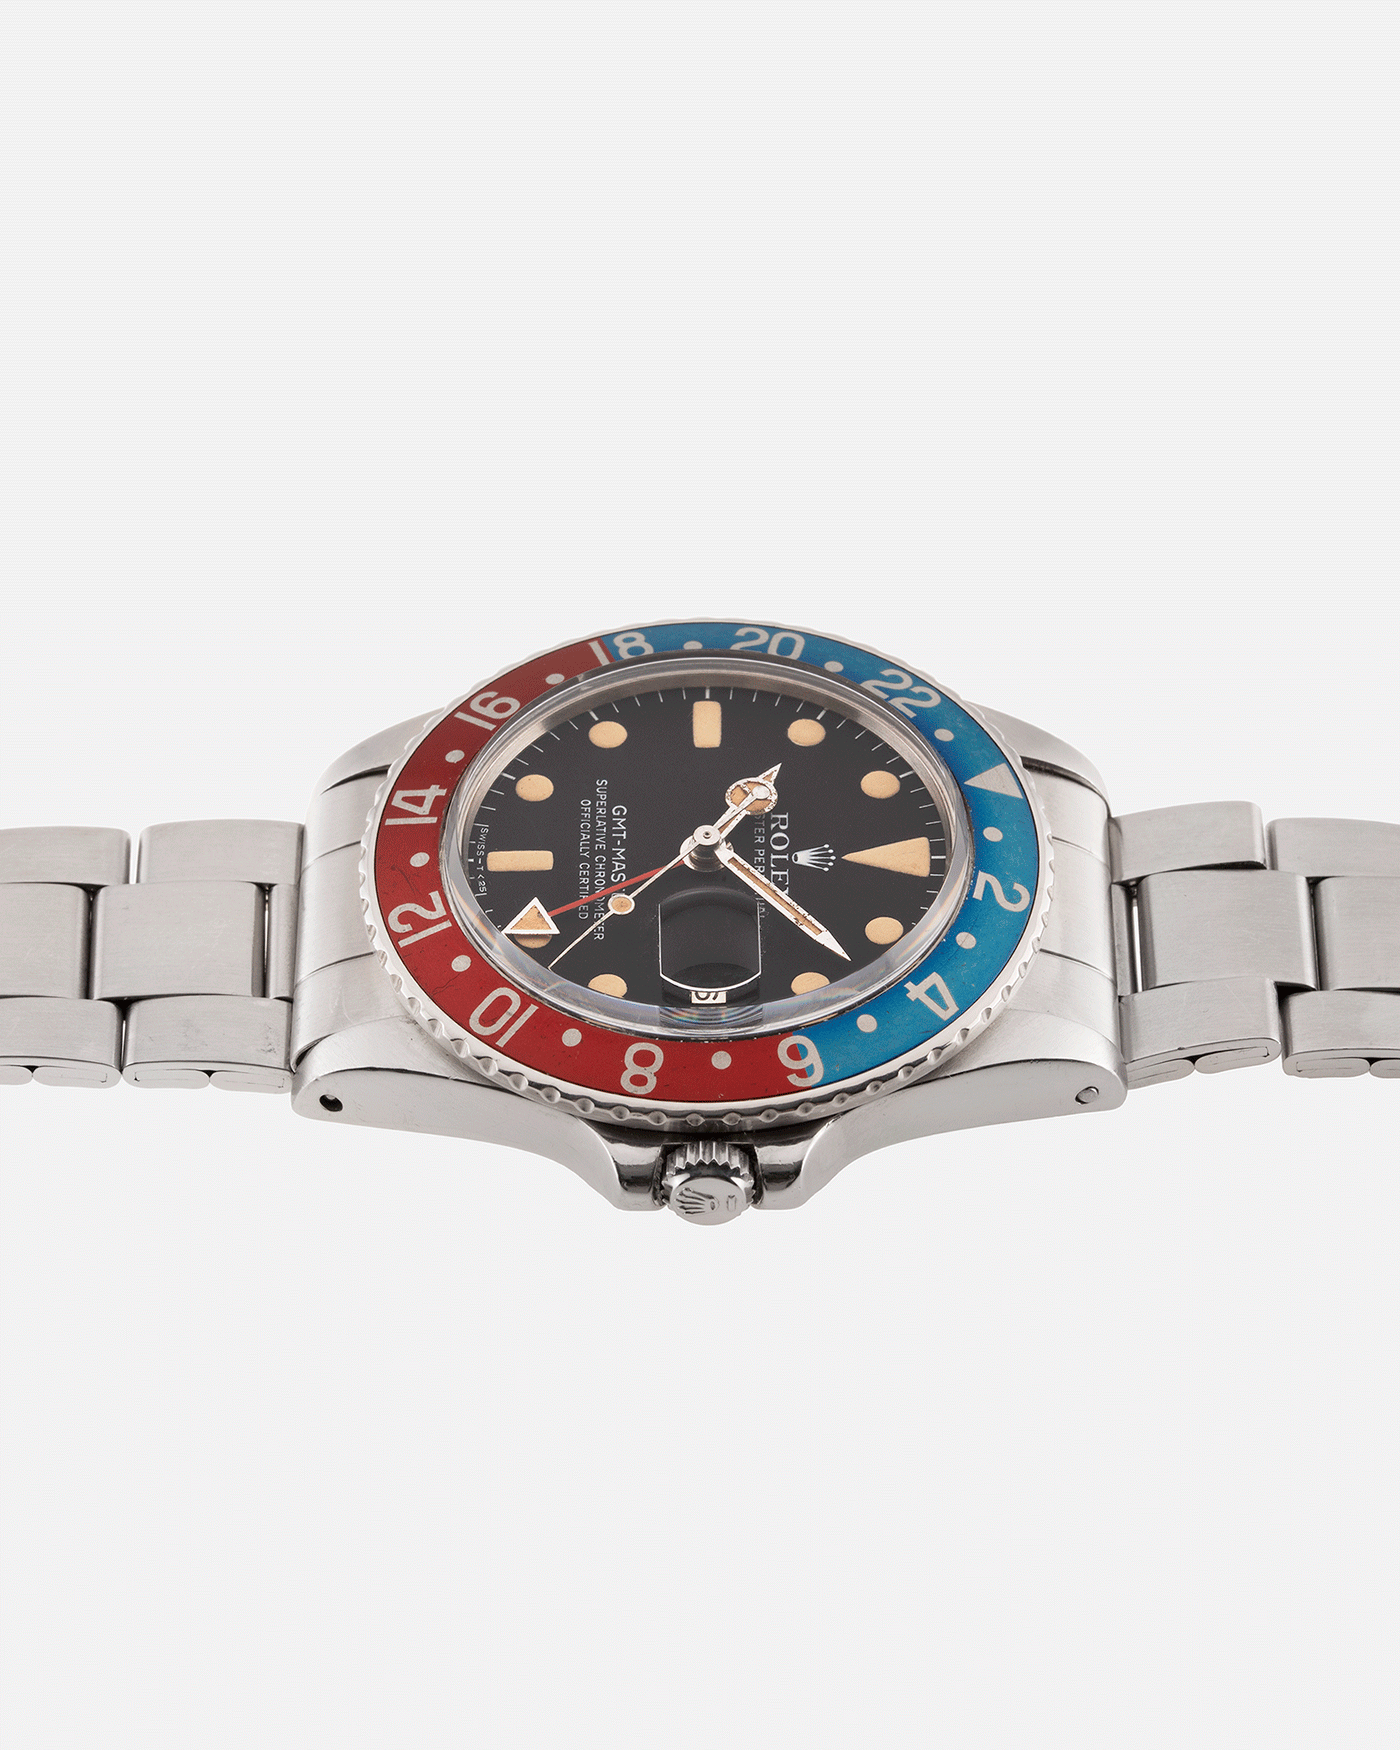 Brand: Rolex Year: 1978/79 Model: GMT-Master Reference Number: 1675 Serial Number: 5,73X,XXX Material: Stainless Steel Movement: Cal. 1570 Case Diameter: 40mm Lug Width: 20mm Bracelet: Rolex 7836 Folded Oyster Bracelet with ‘358’ end links